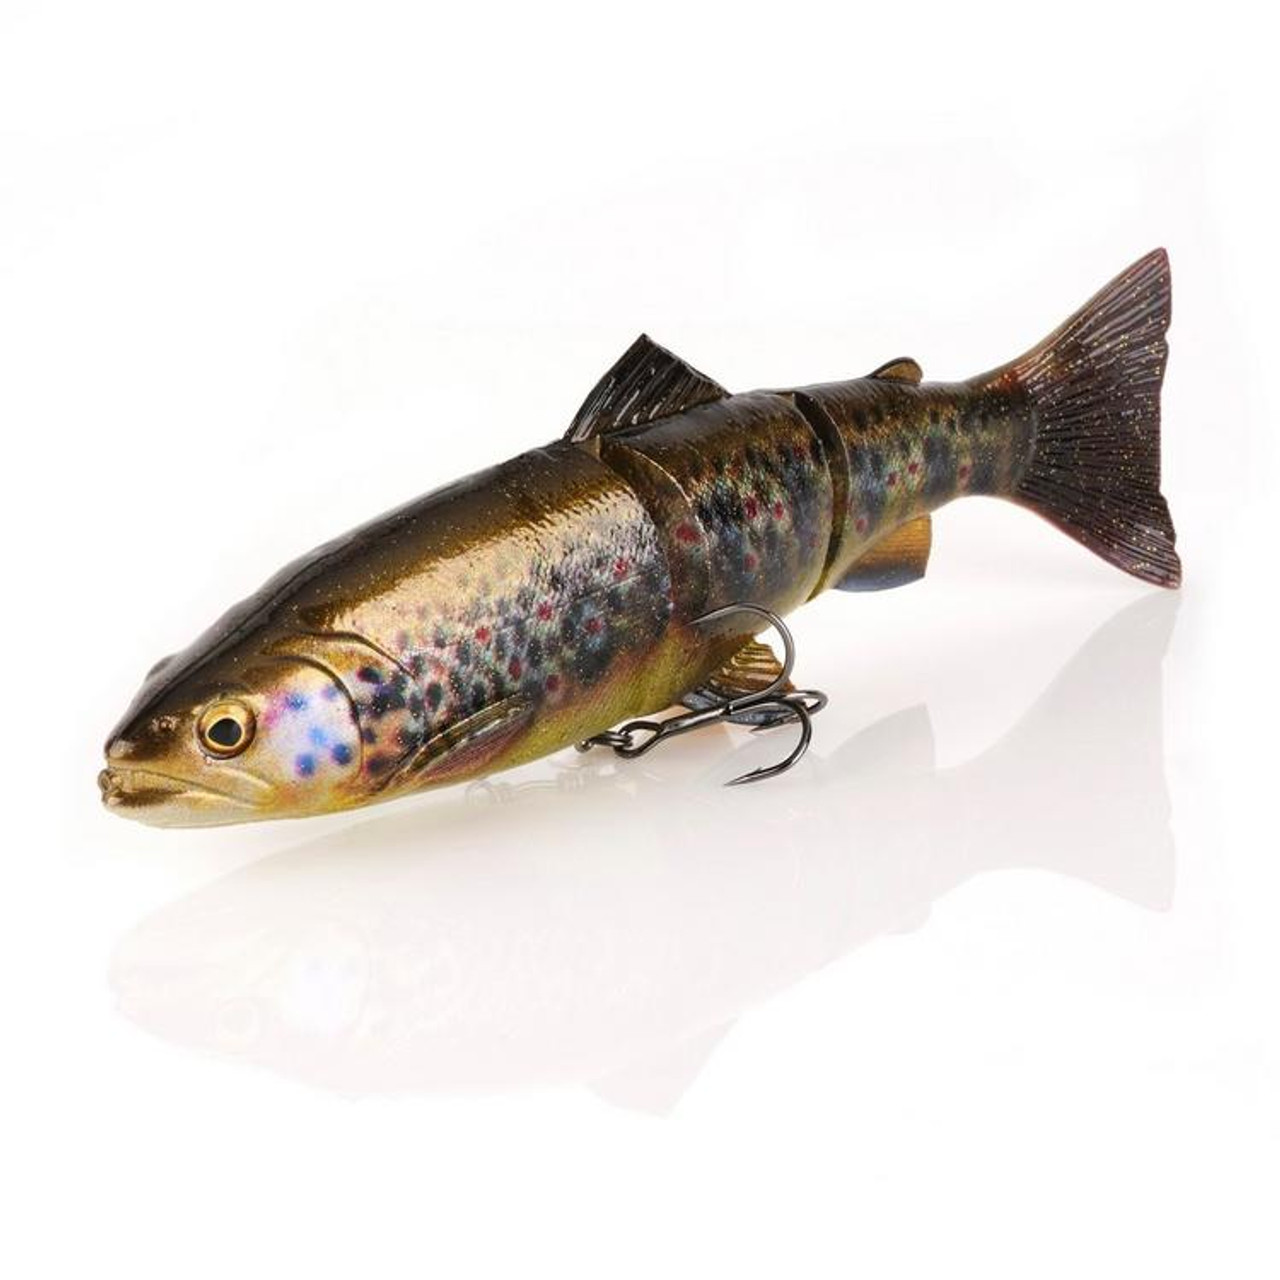 Savage Gear 4D Pro Series Line Thru Trout - 8in Brown Trout - FISH307.com